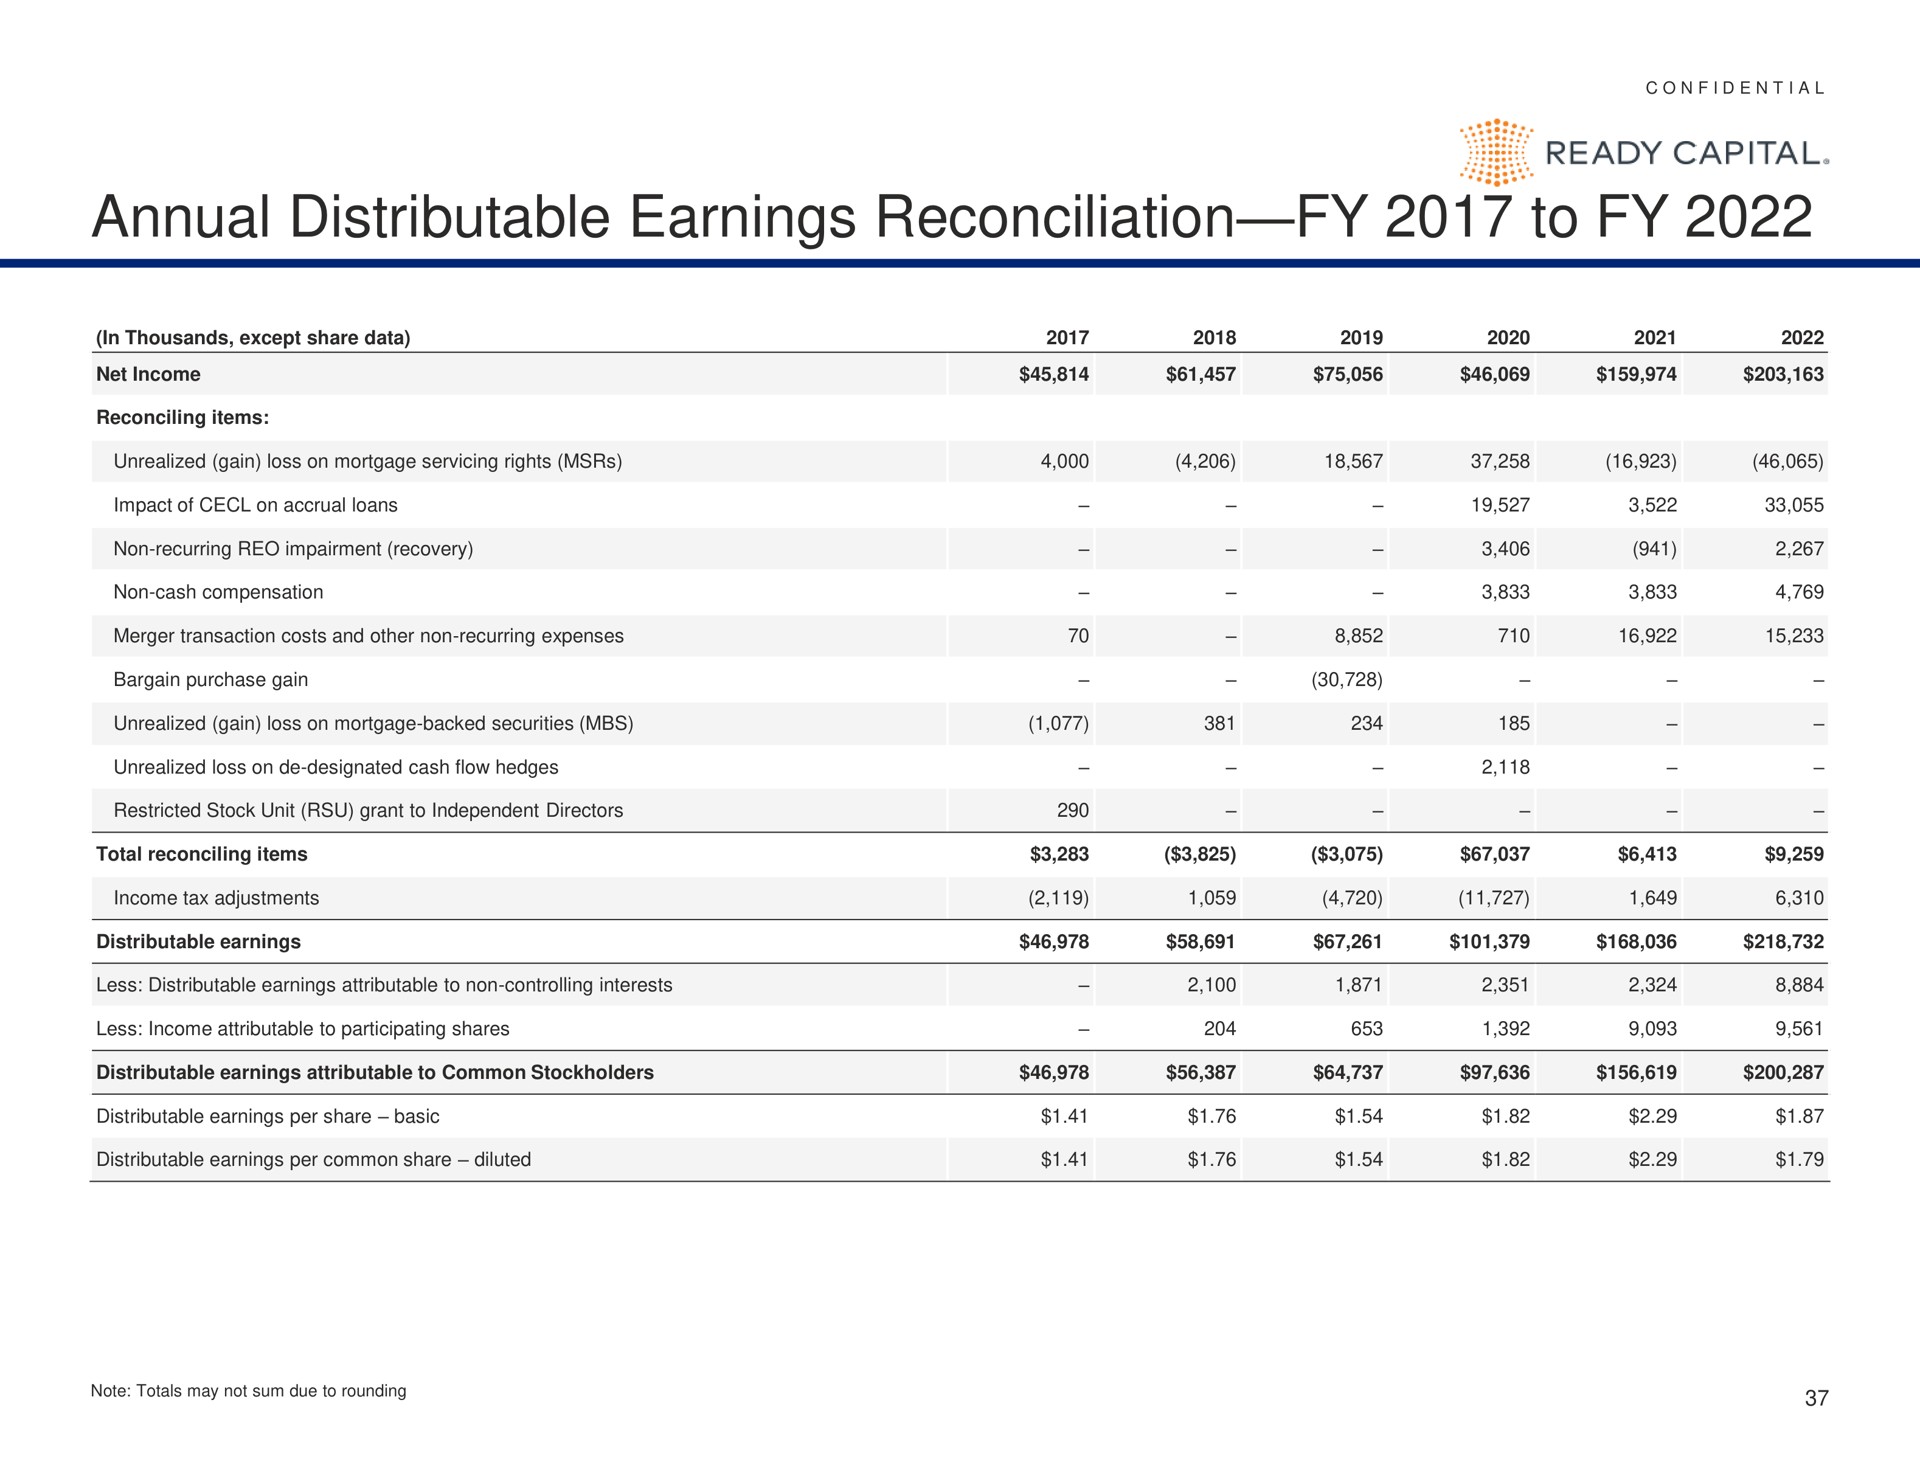 annual distributable earnings reconciliation to ready capital | Ready Capital